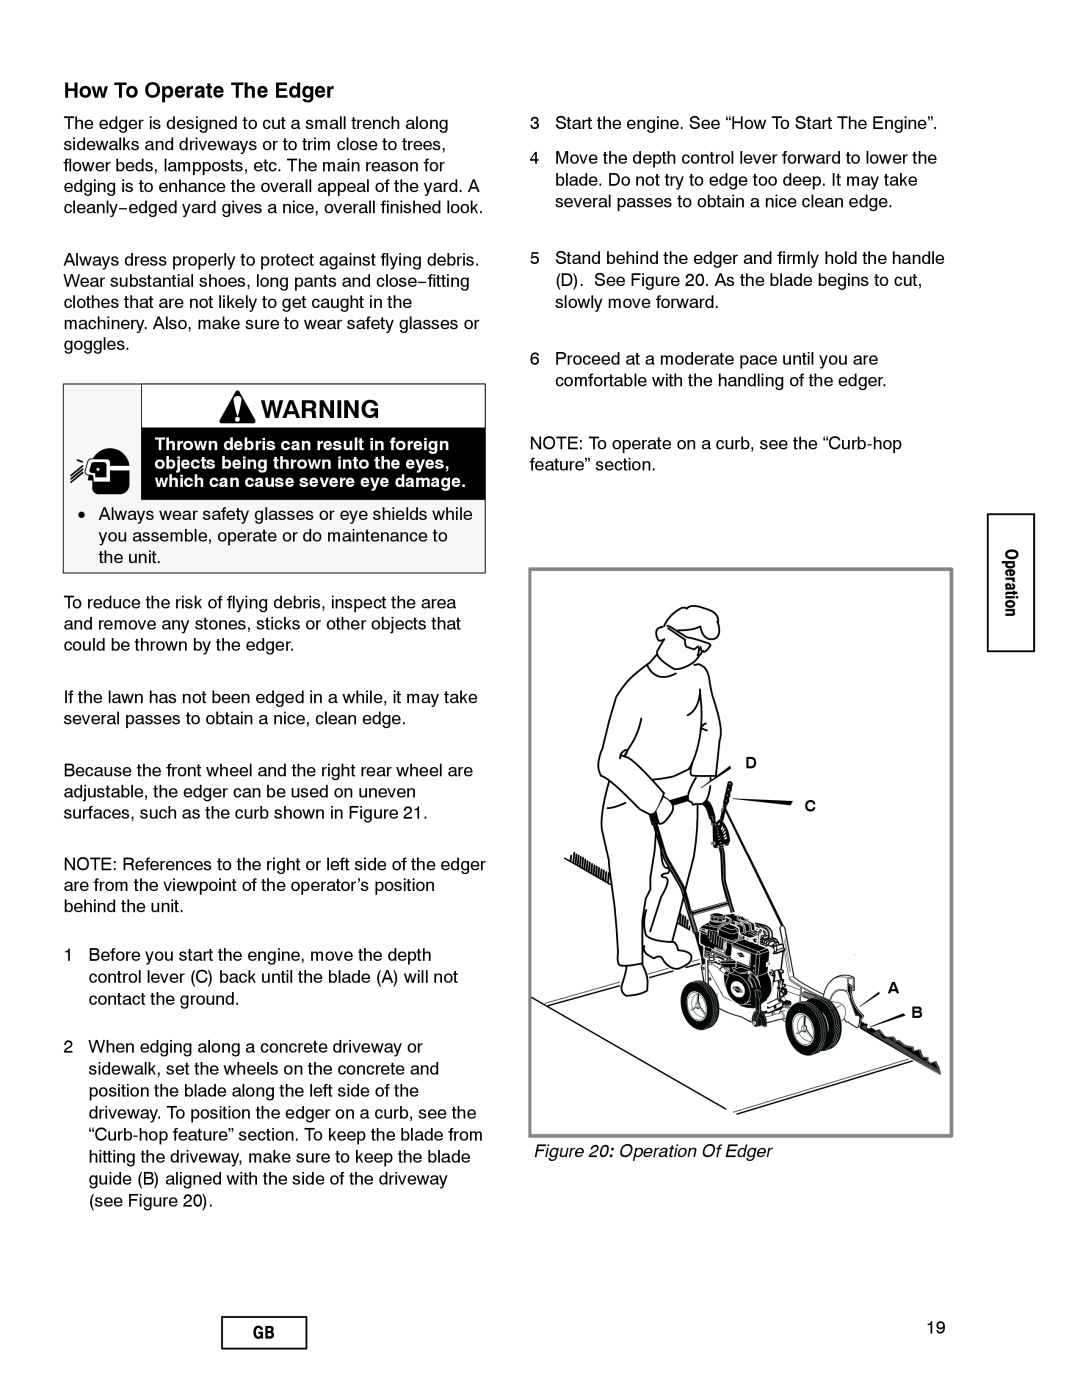 Husqvarna LE389 manual How To Operate The Edger, Operation Of Edger 